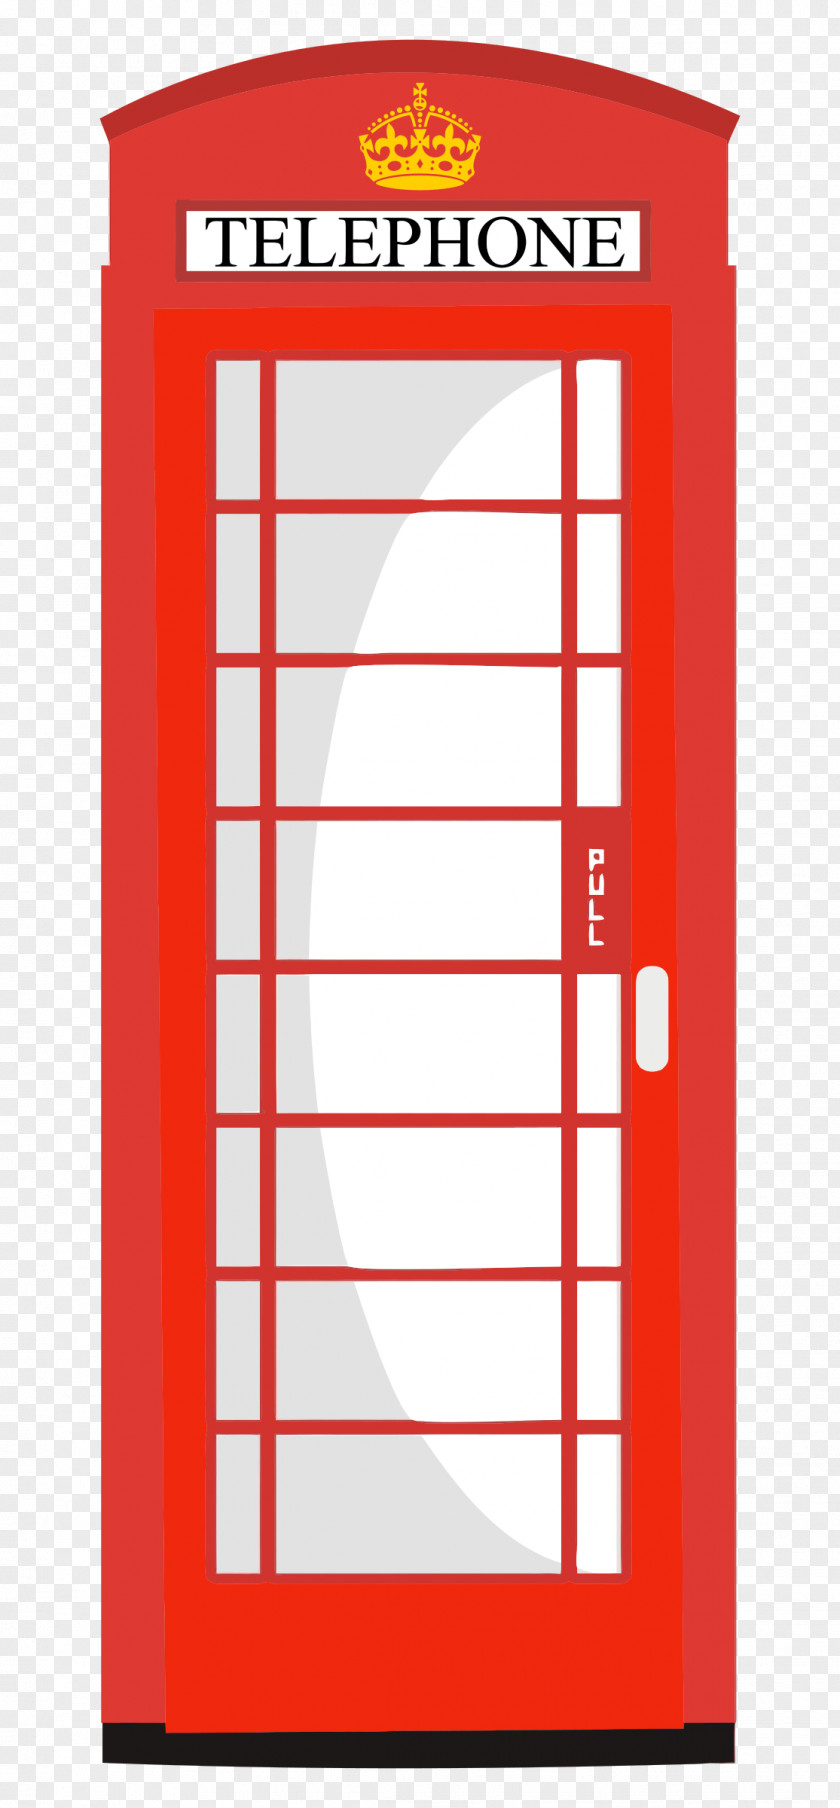 Cabin IPhone Red Telephone Box Booth Clip Art PNG